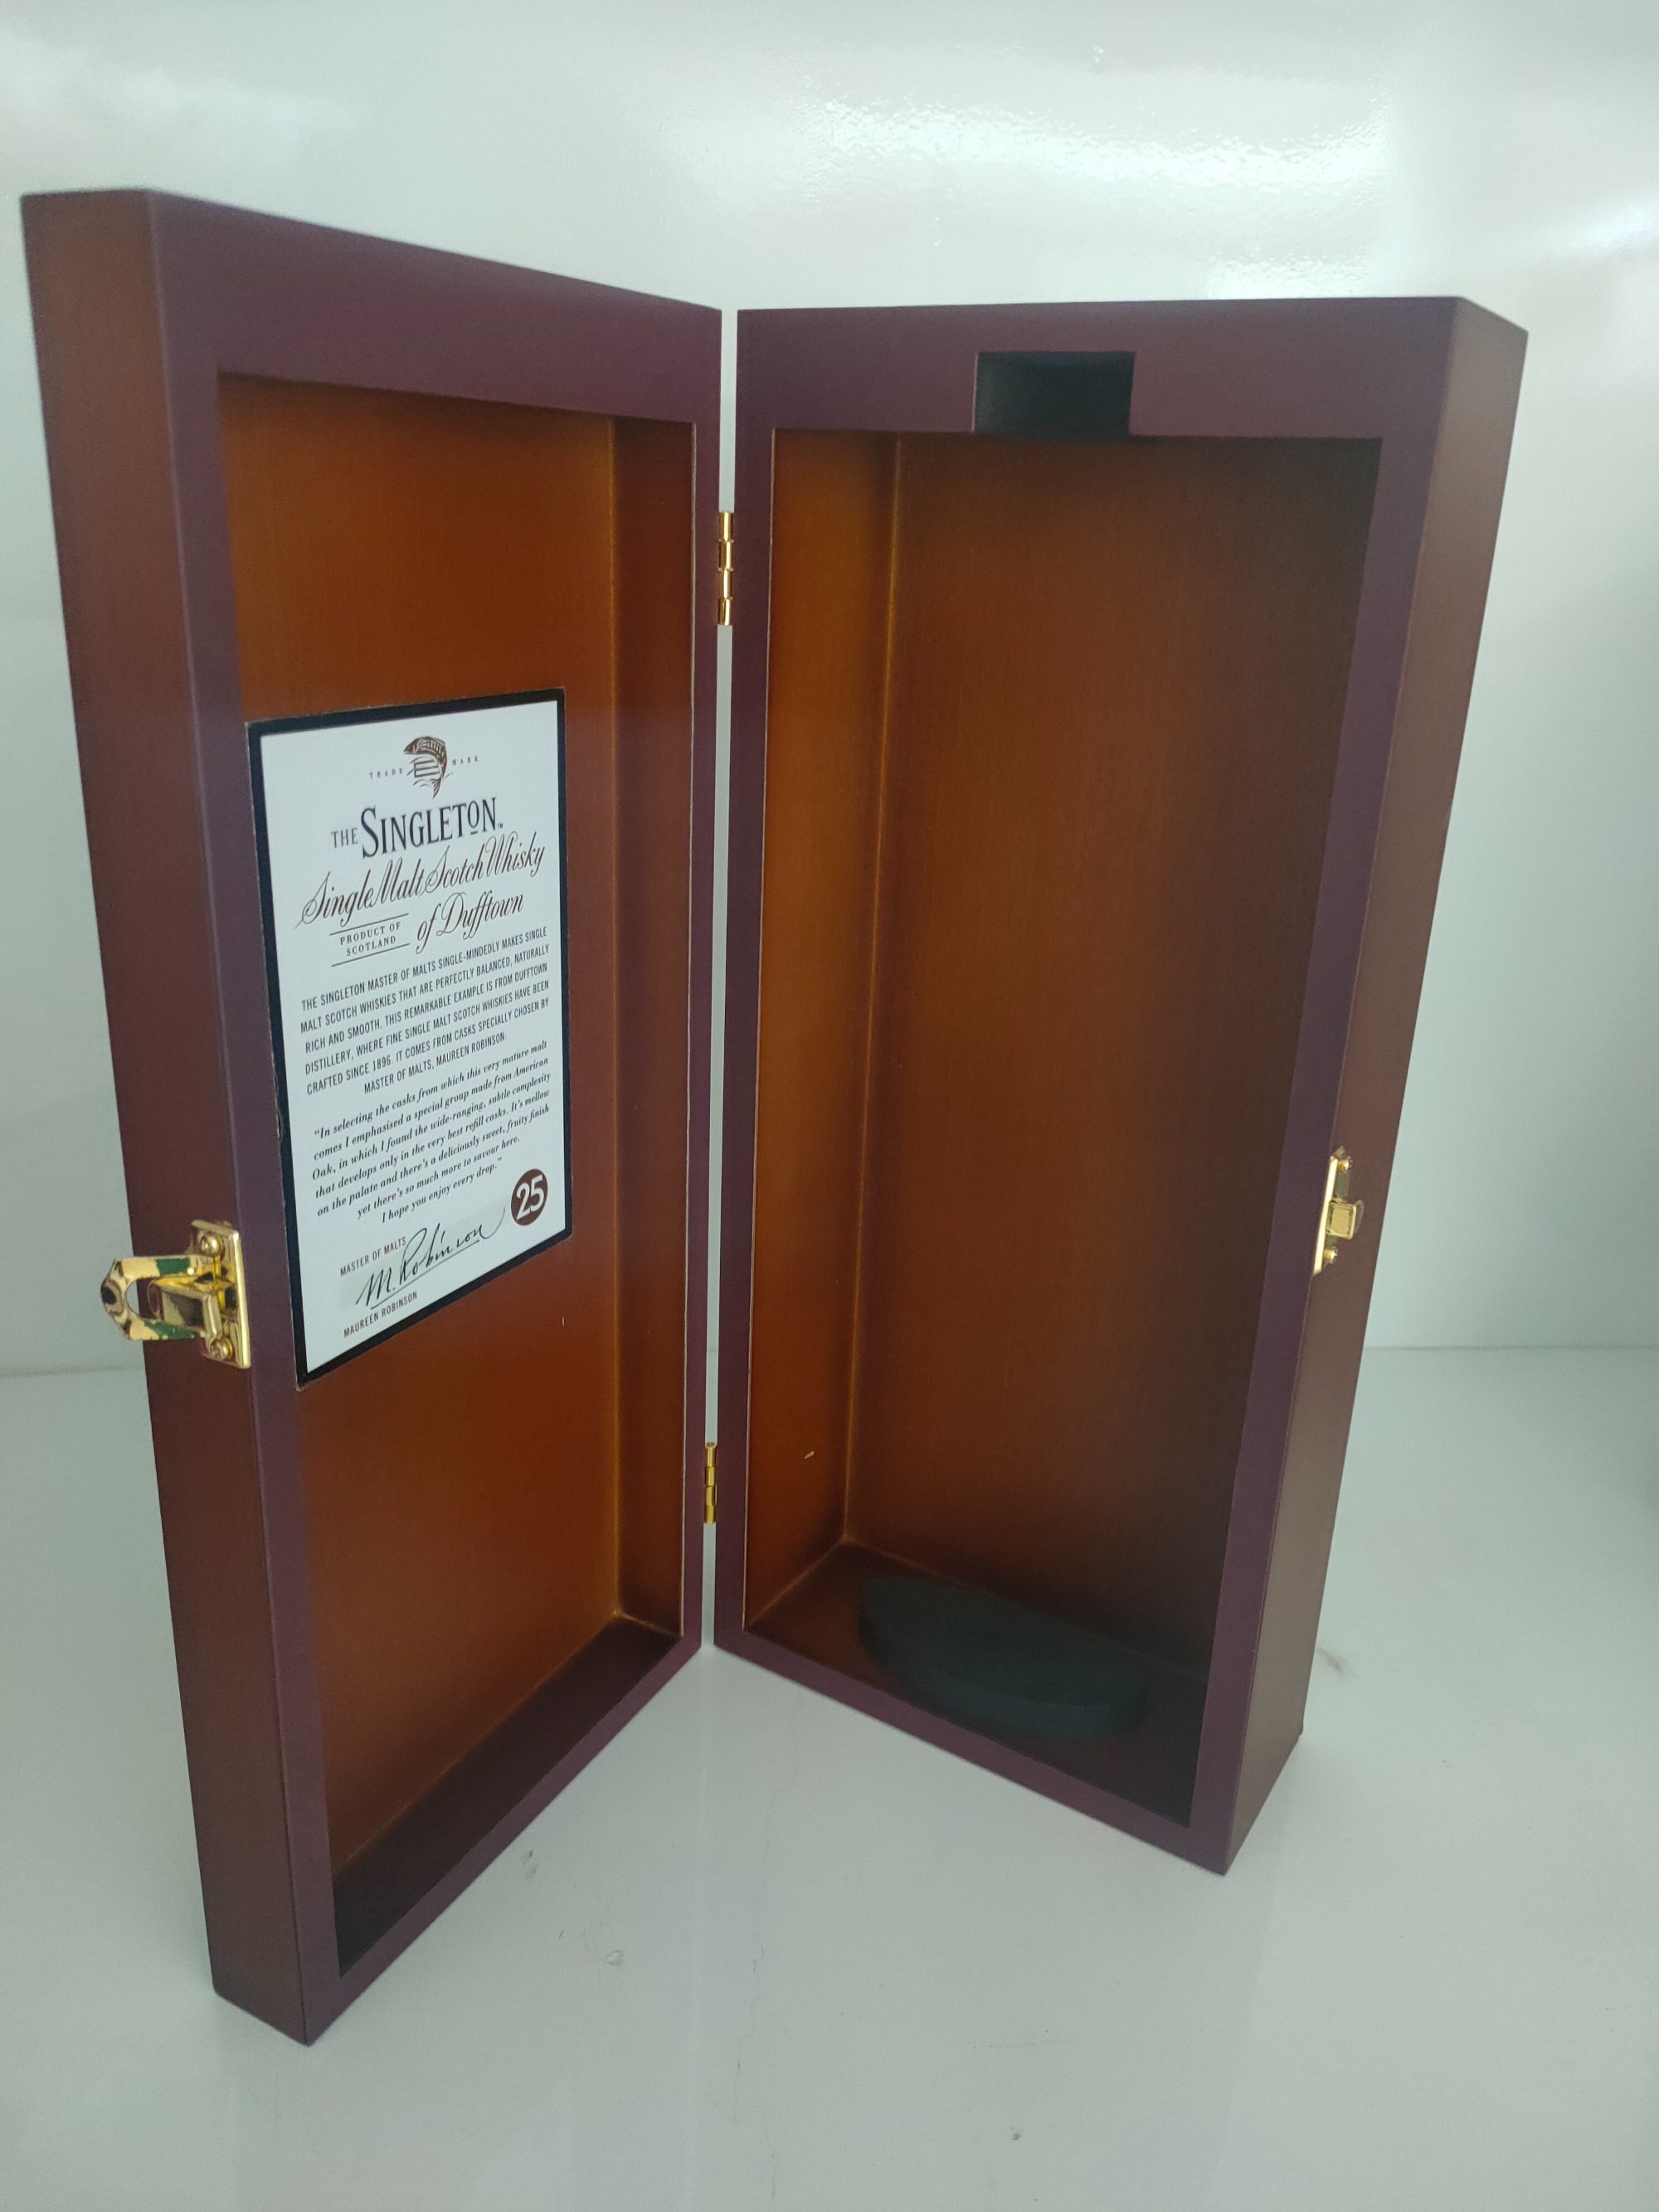 Best Selling MDF Red High Glossy Piano FInish Button Lock Wooden Wine Package Box